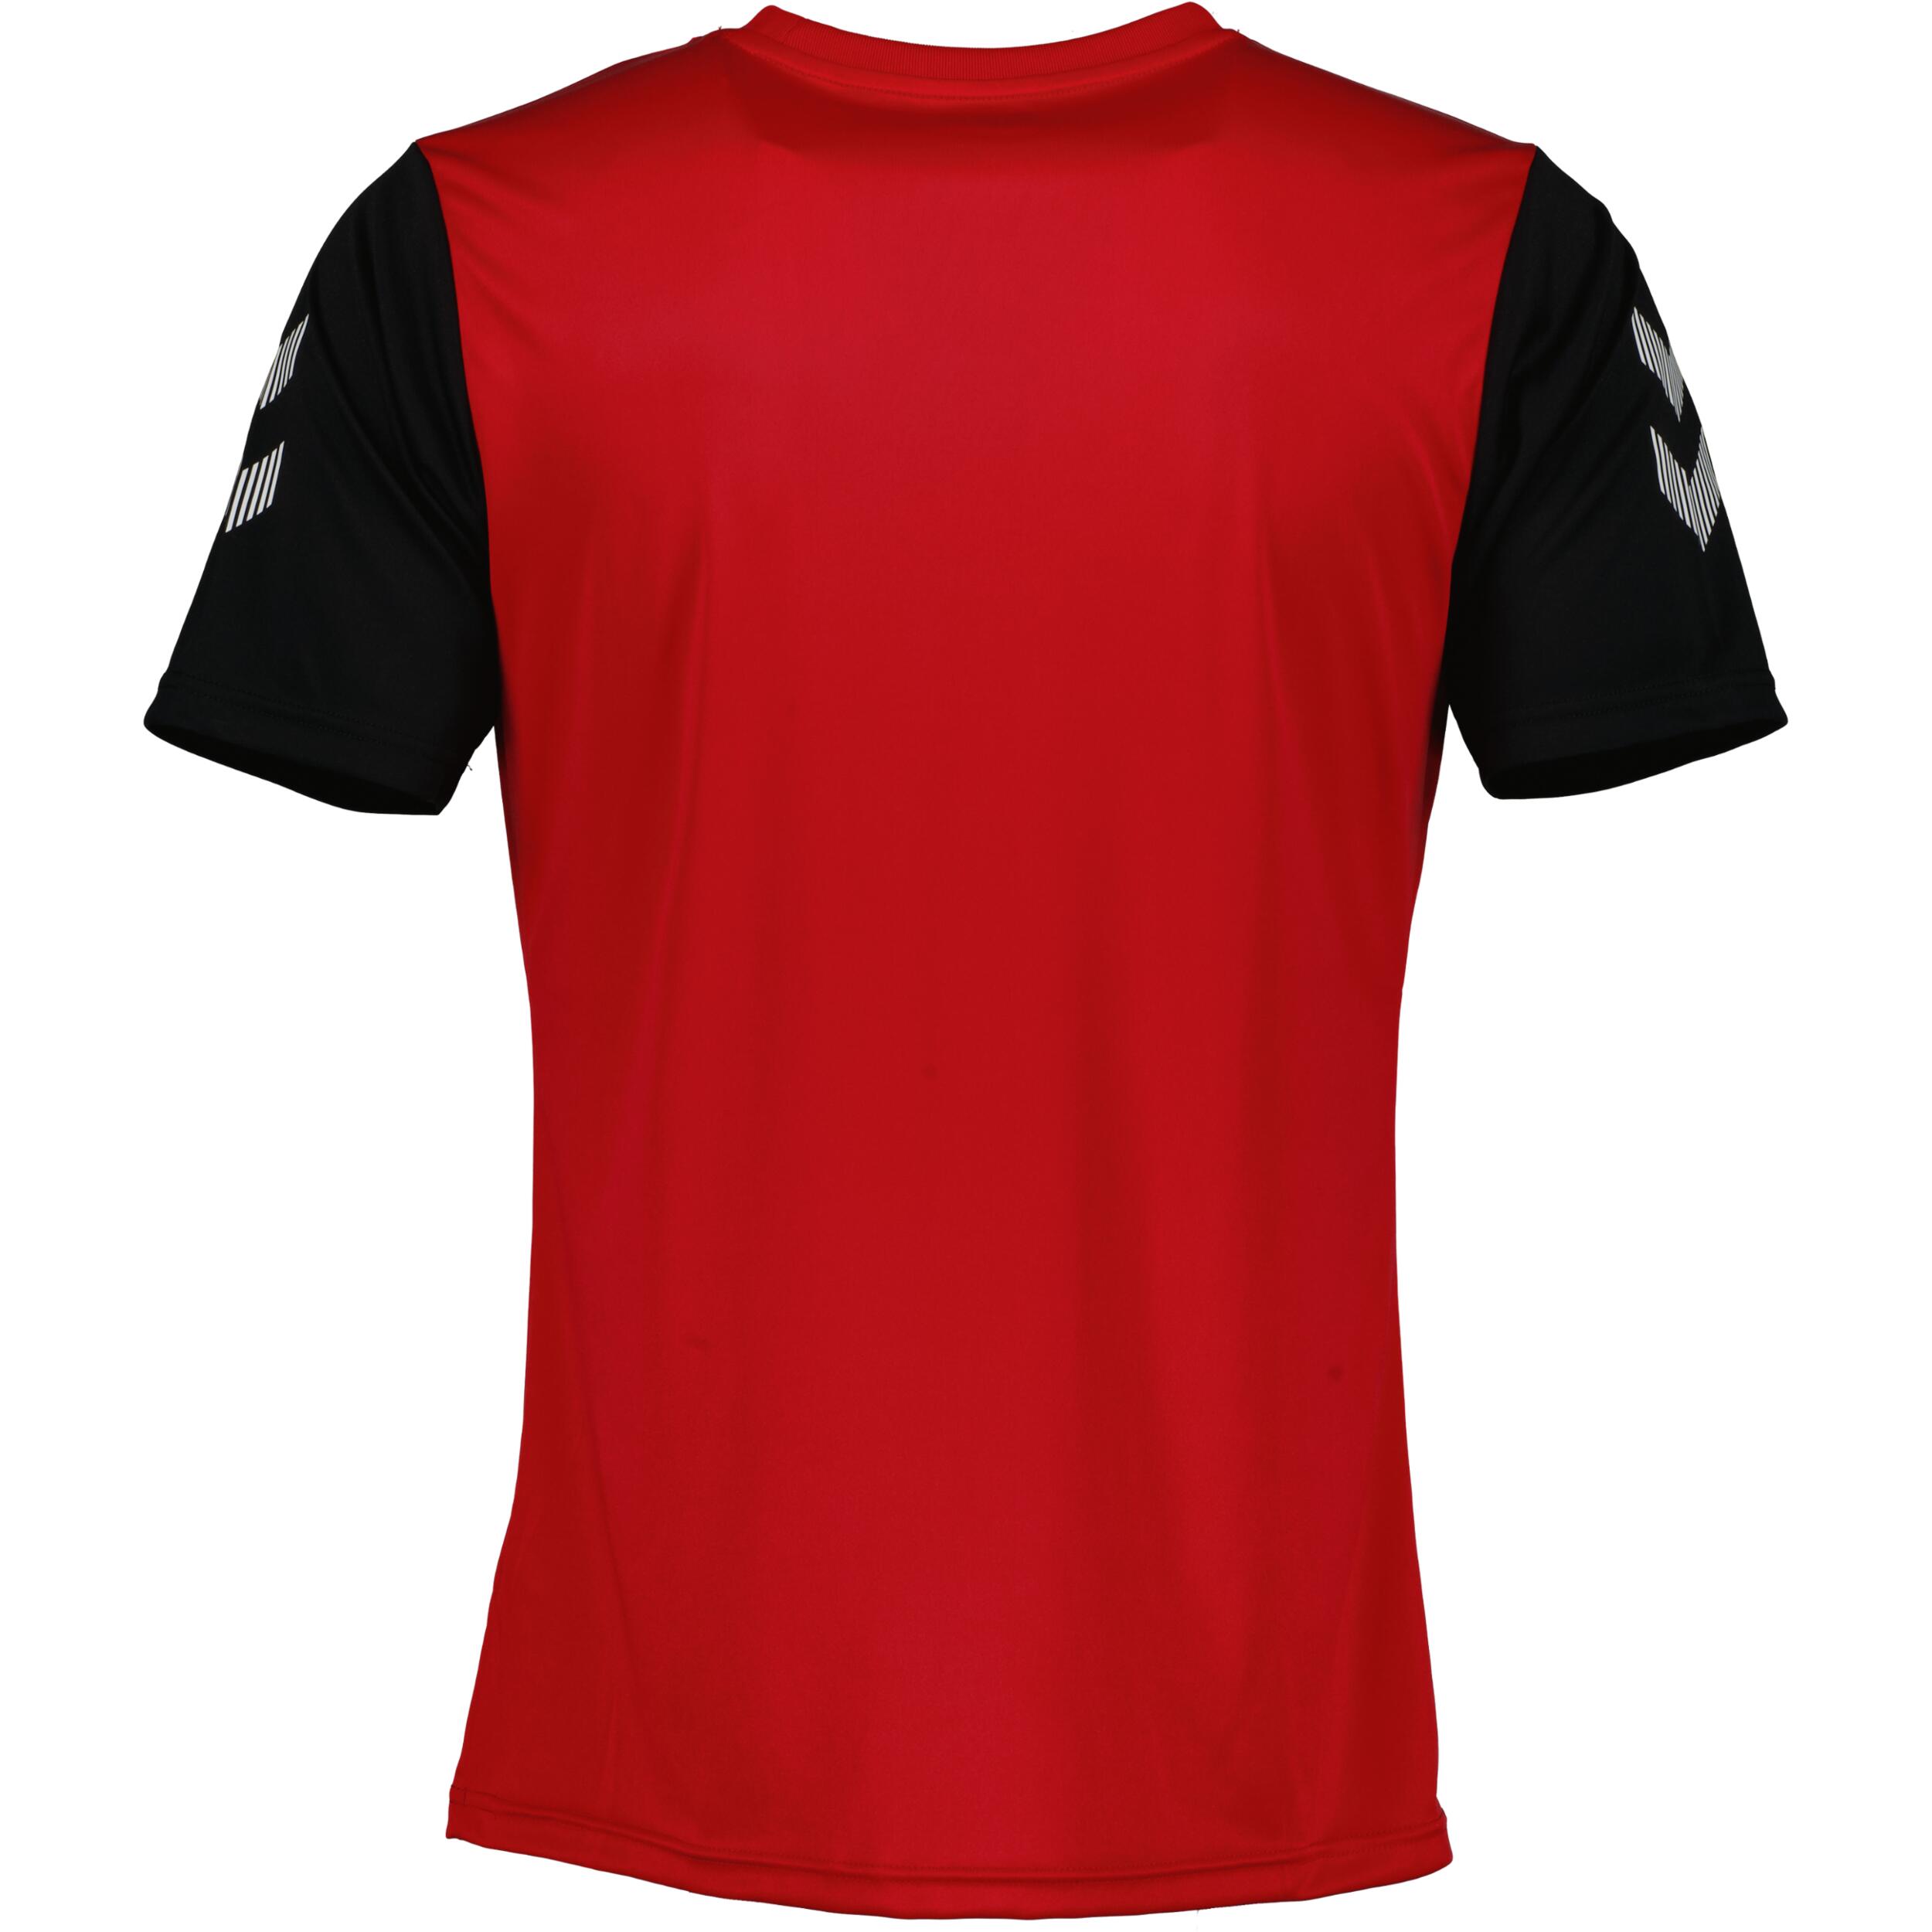 Match jersey for kids, great for football, in red/black 2/3